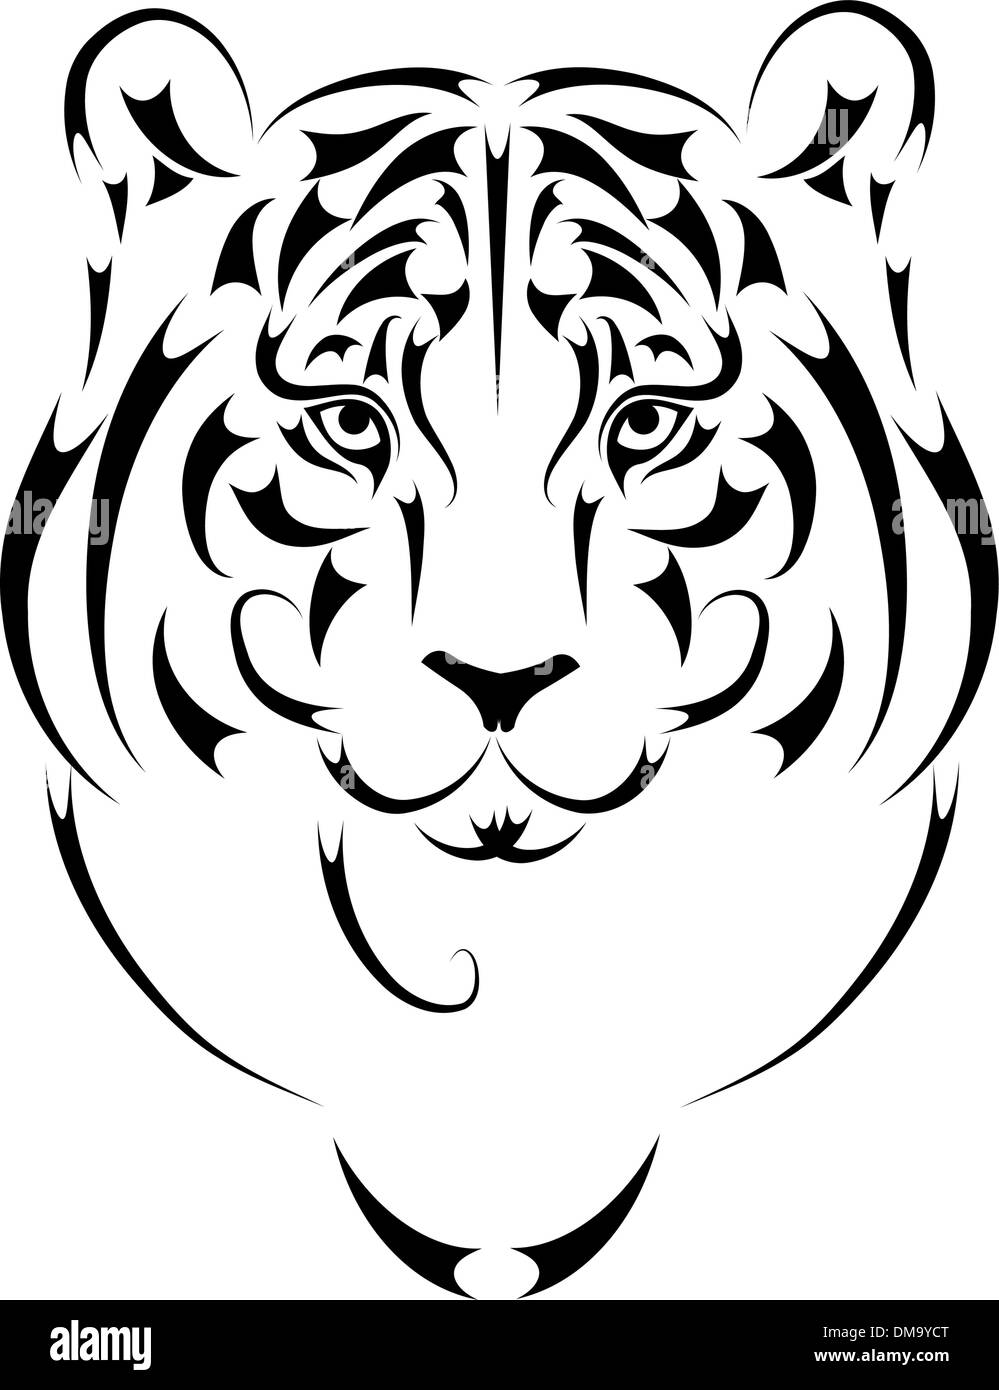 Tiger stylized silhouette, symbol 2010 year Stock Vector